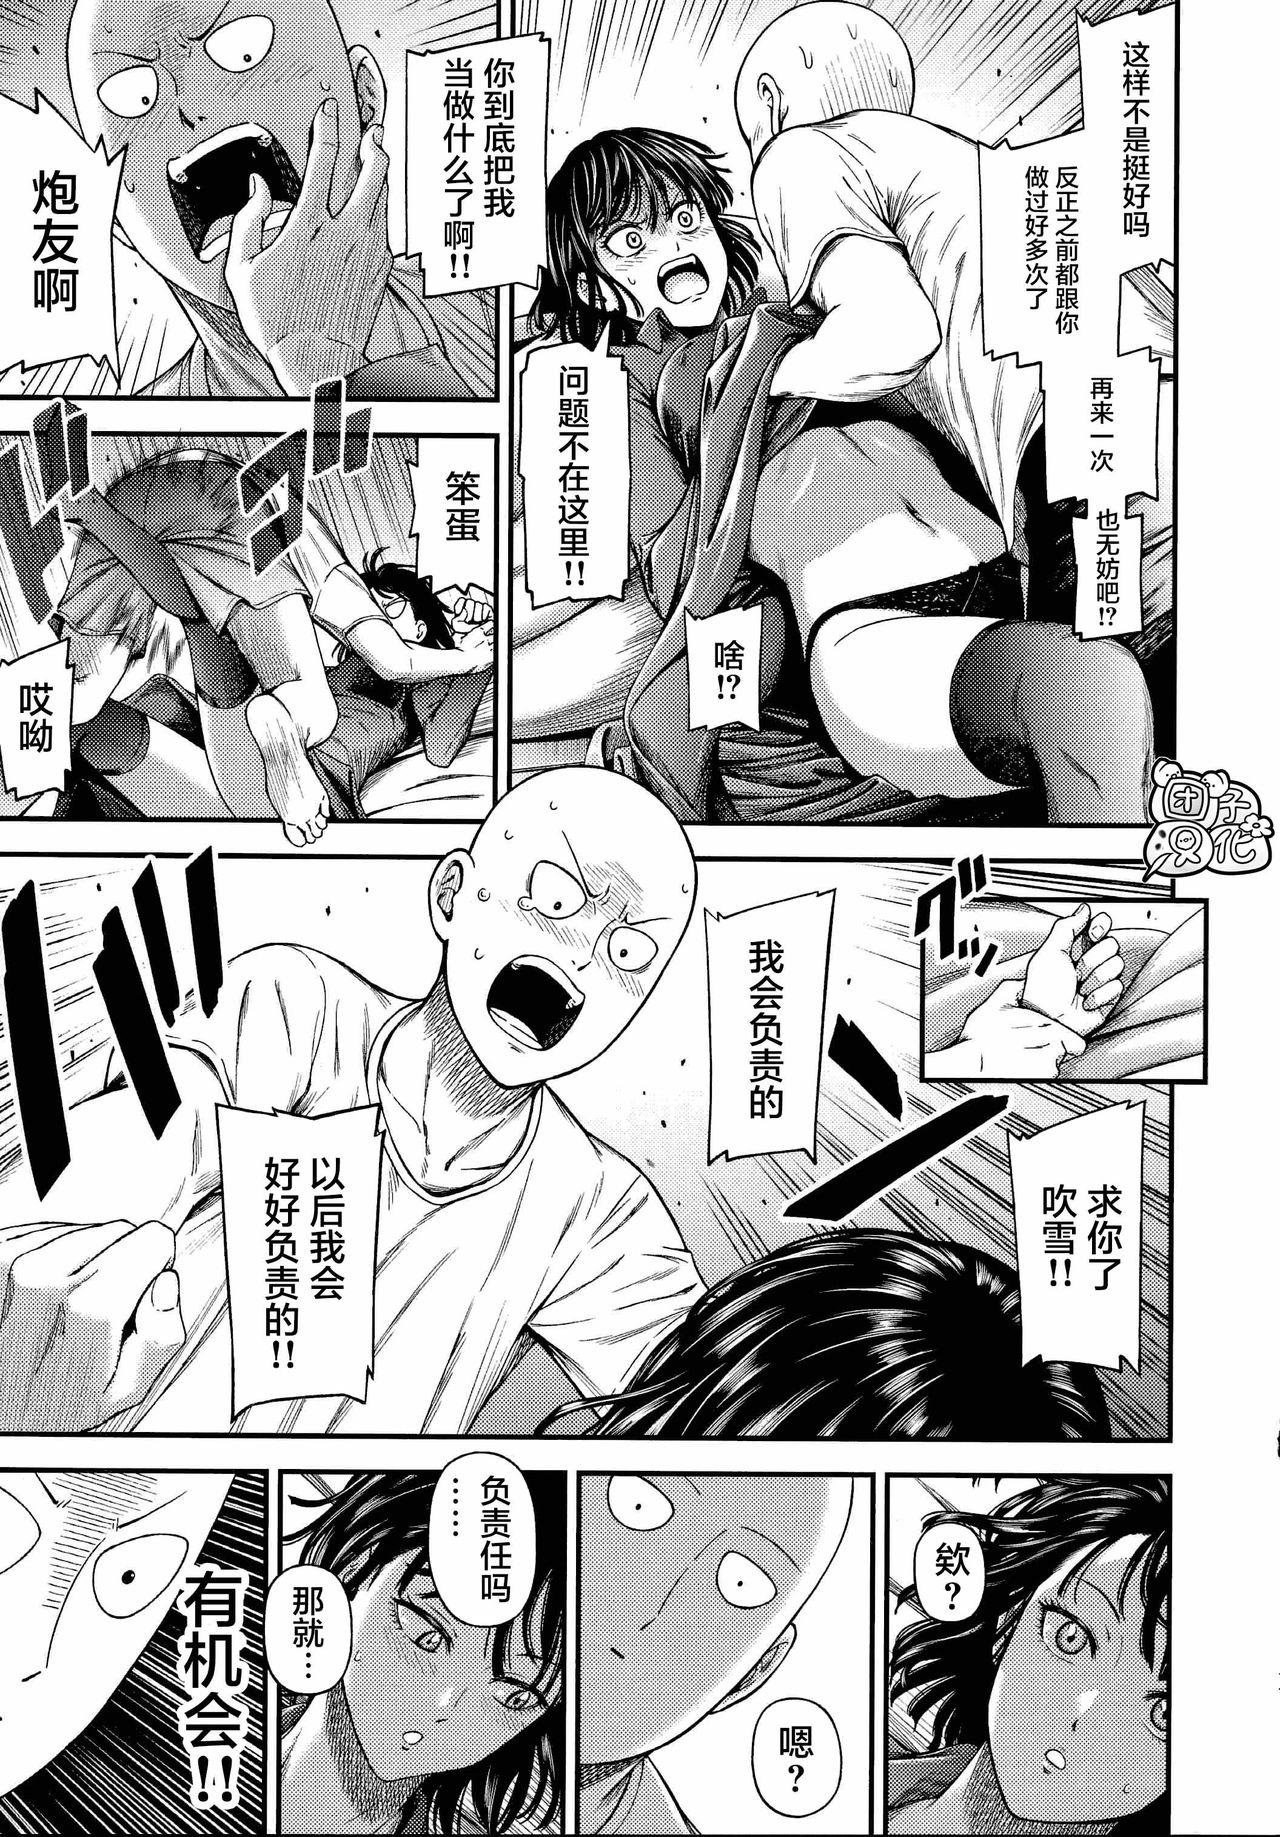 Ngentot ONE-HURRICANE - One punch man Freeporn - Page 12